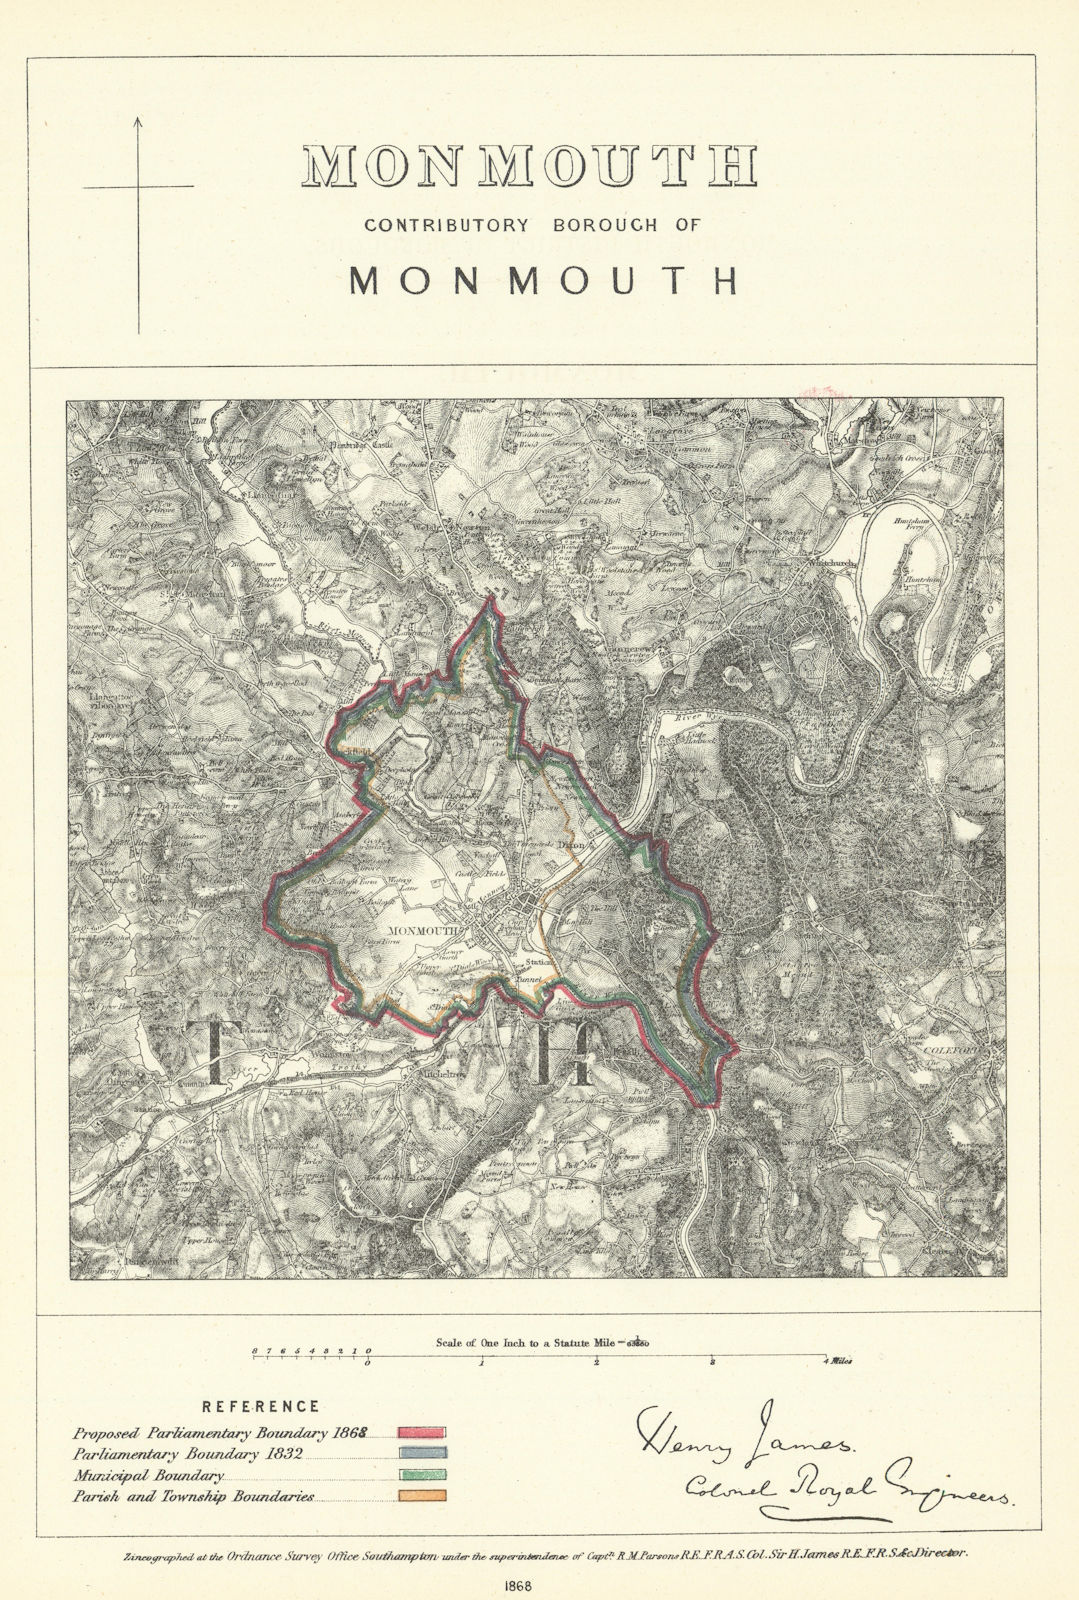 Monmouth Contributory Borough of Monmouth. JAMES. Boundary Commission 1868 map